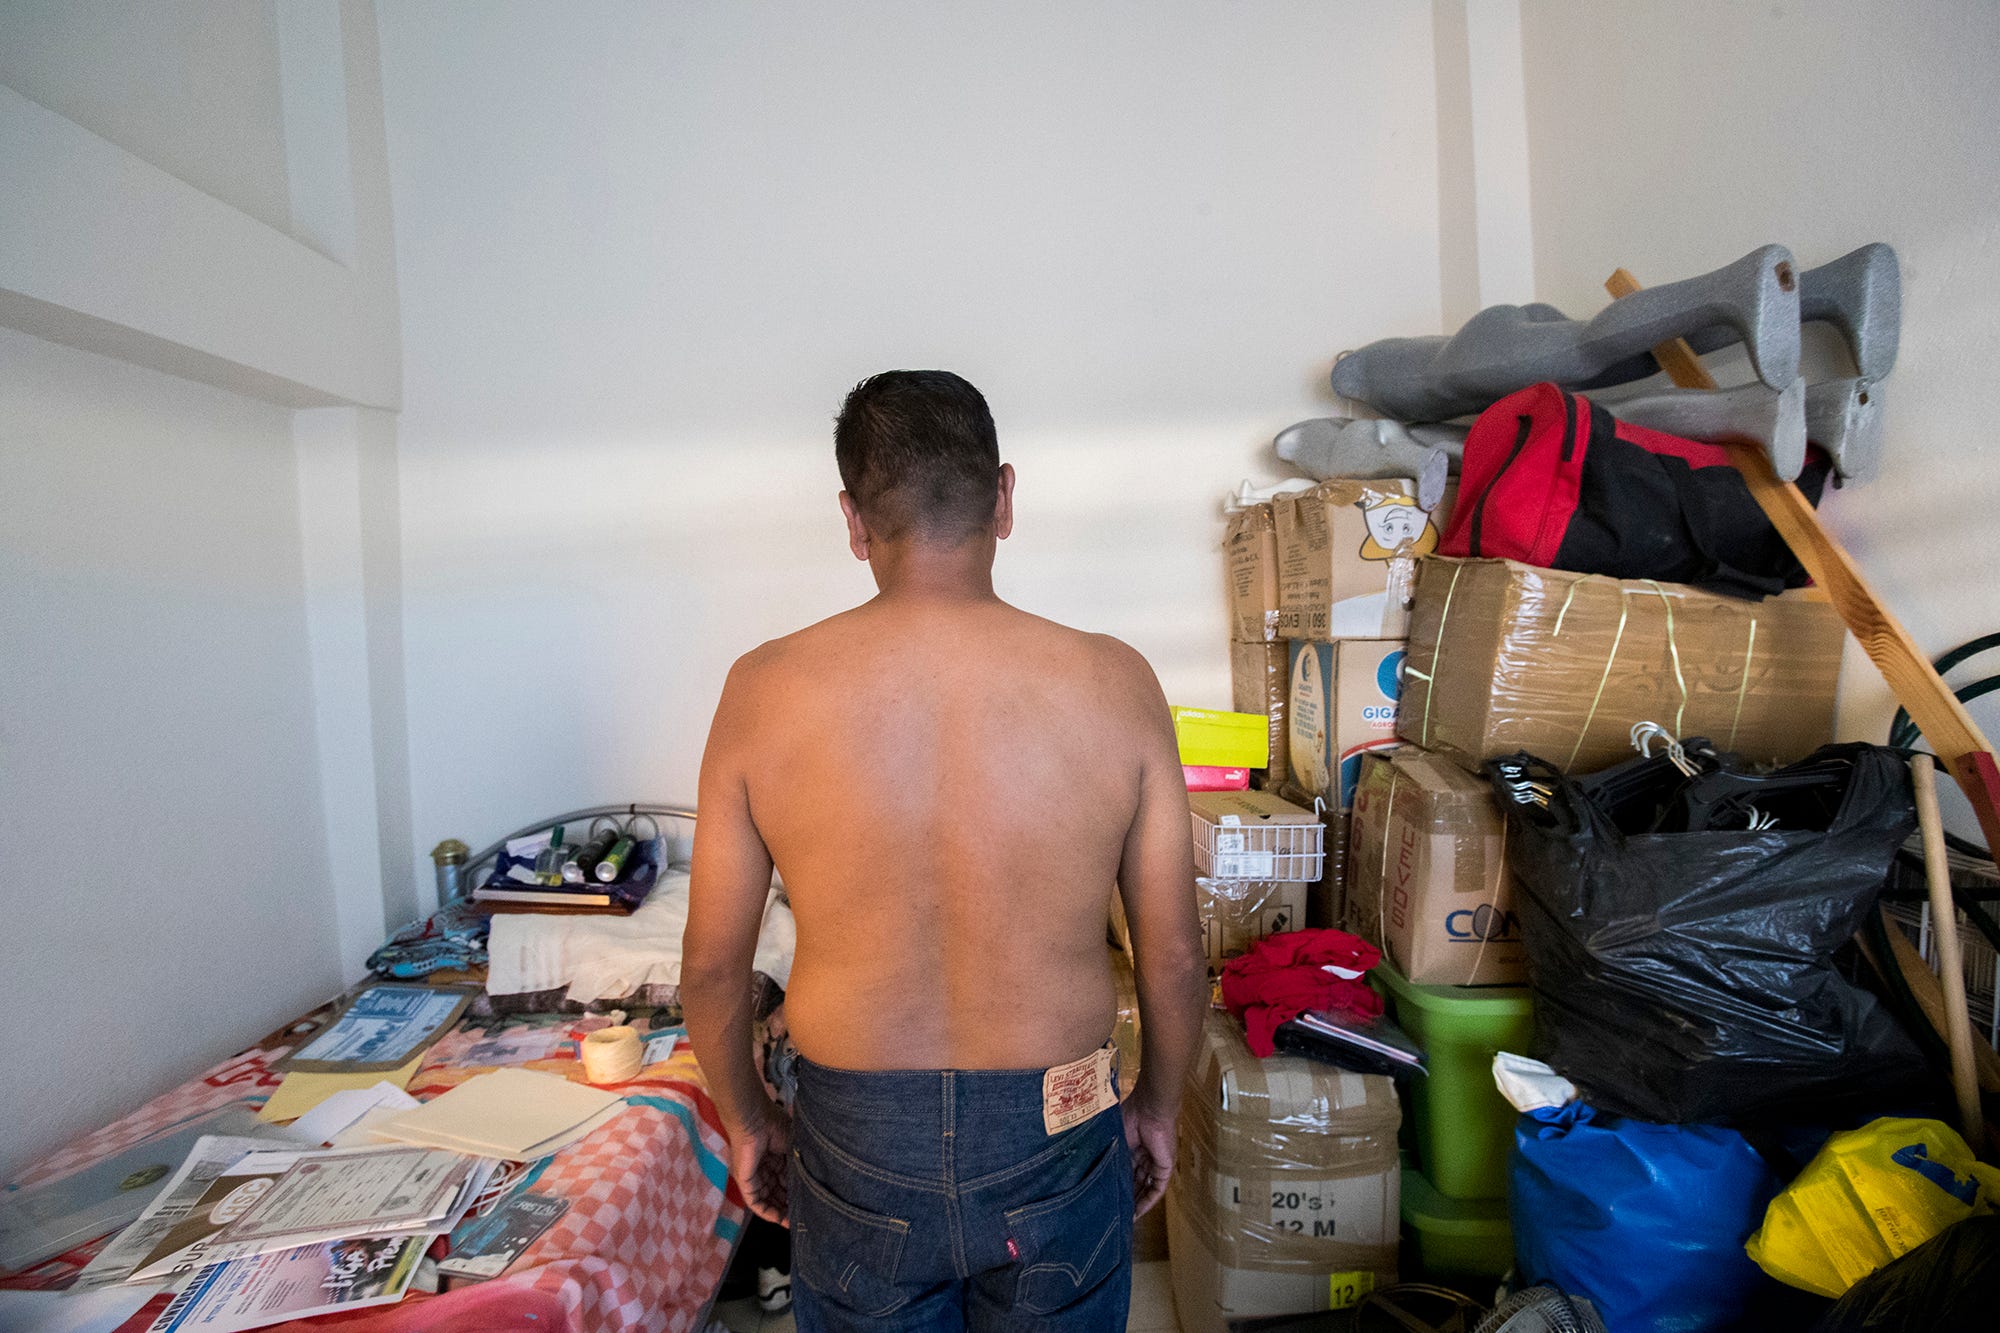 Jorge was extorted, kidnapped and beaten by criminal organizations after being deported to Guerrero. Now he lives in hiding in the neighboring state of Morelos.